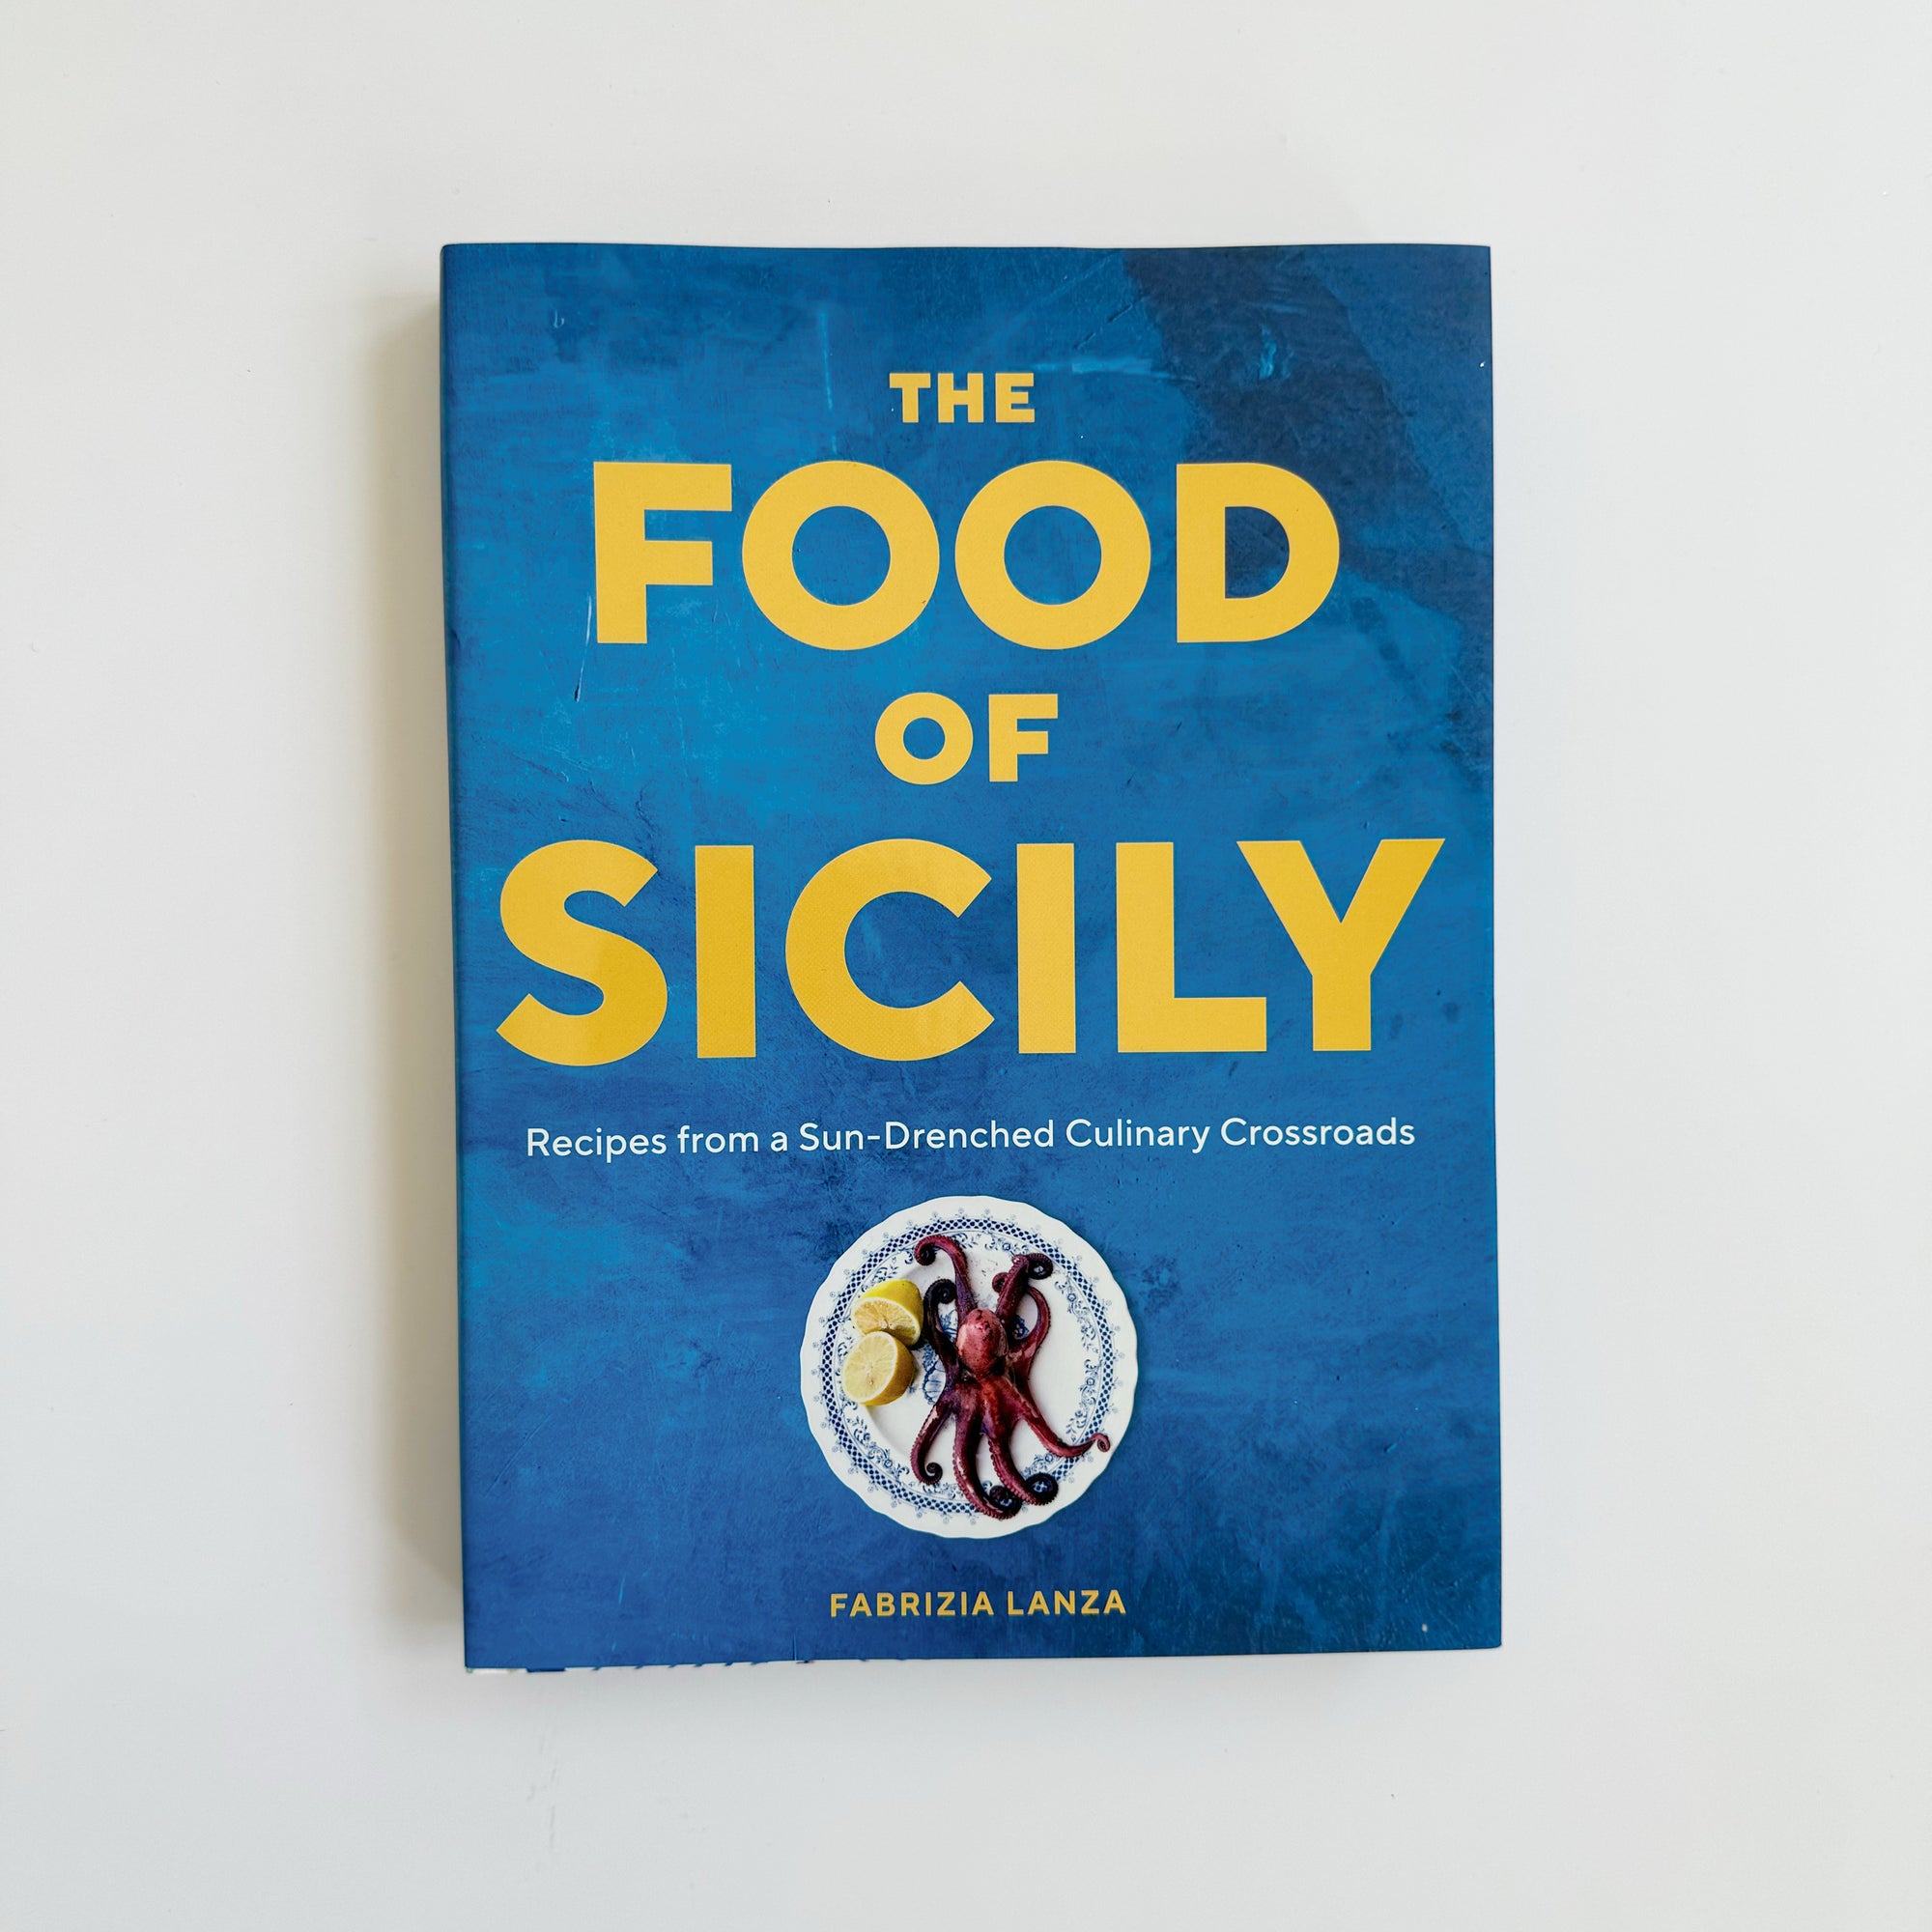 THE FOOD OF SICILY